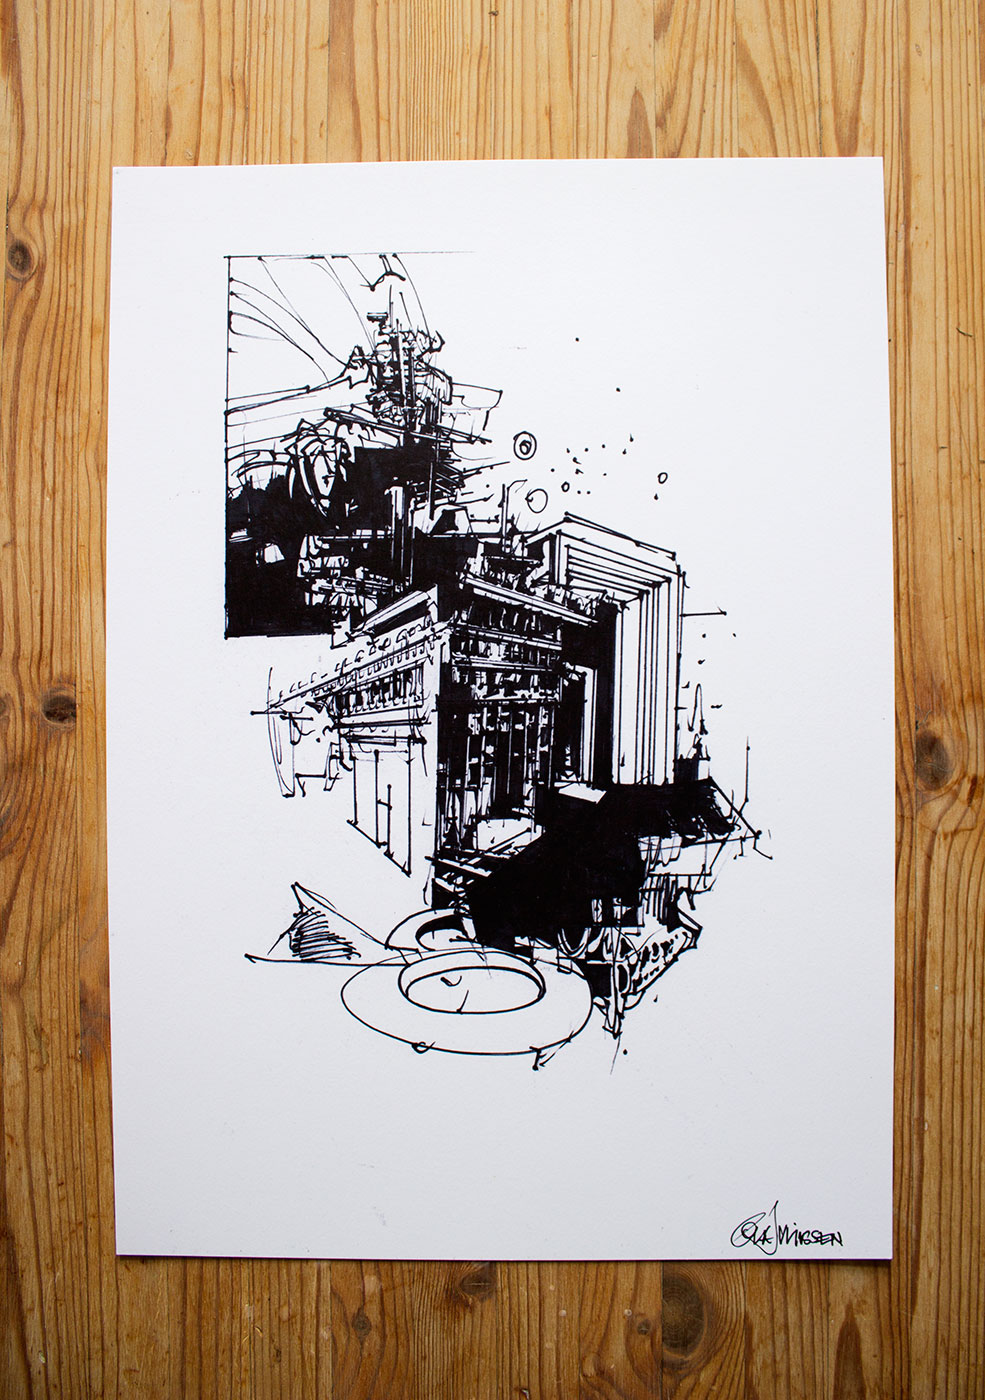 art-prints, gliceé, aesthetic, illustrative, monochrome, architecture, black, white, ink, paper, abstract-forms, architectural, black-and-white, buildings, decorative, expressionism, graffiti, male, sketch, urban, Buy original high quality art. Paintings, drawings, limited edition prints & posters by talented artists.